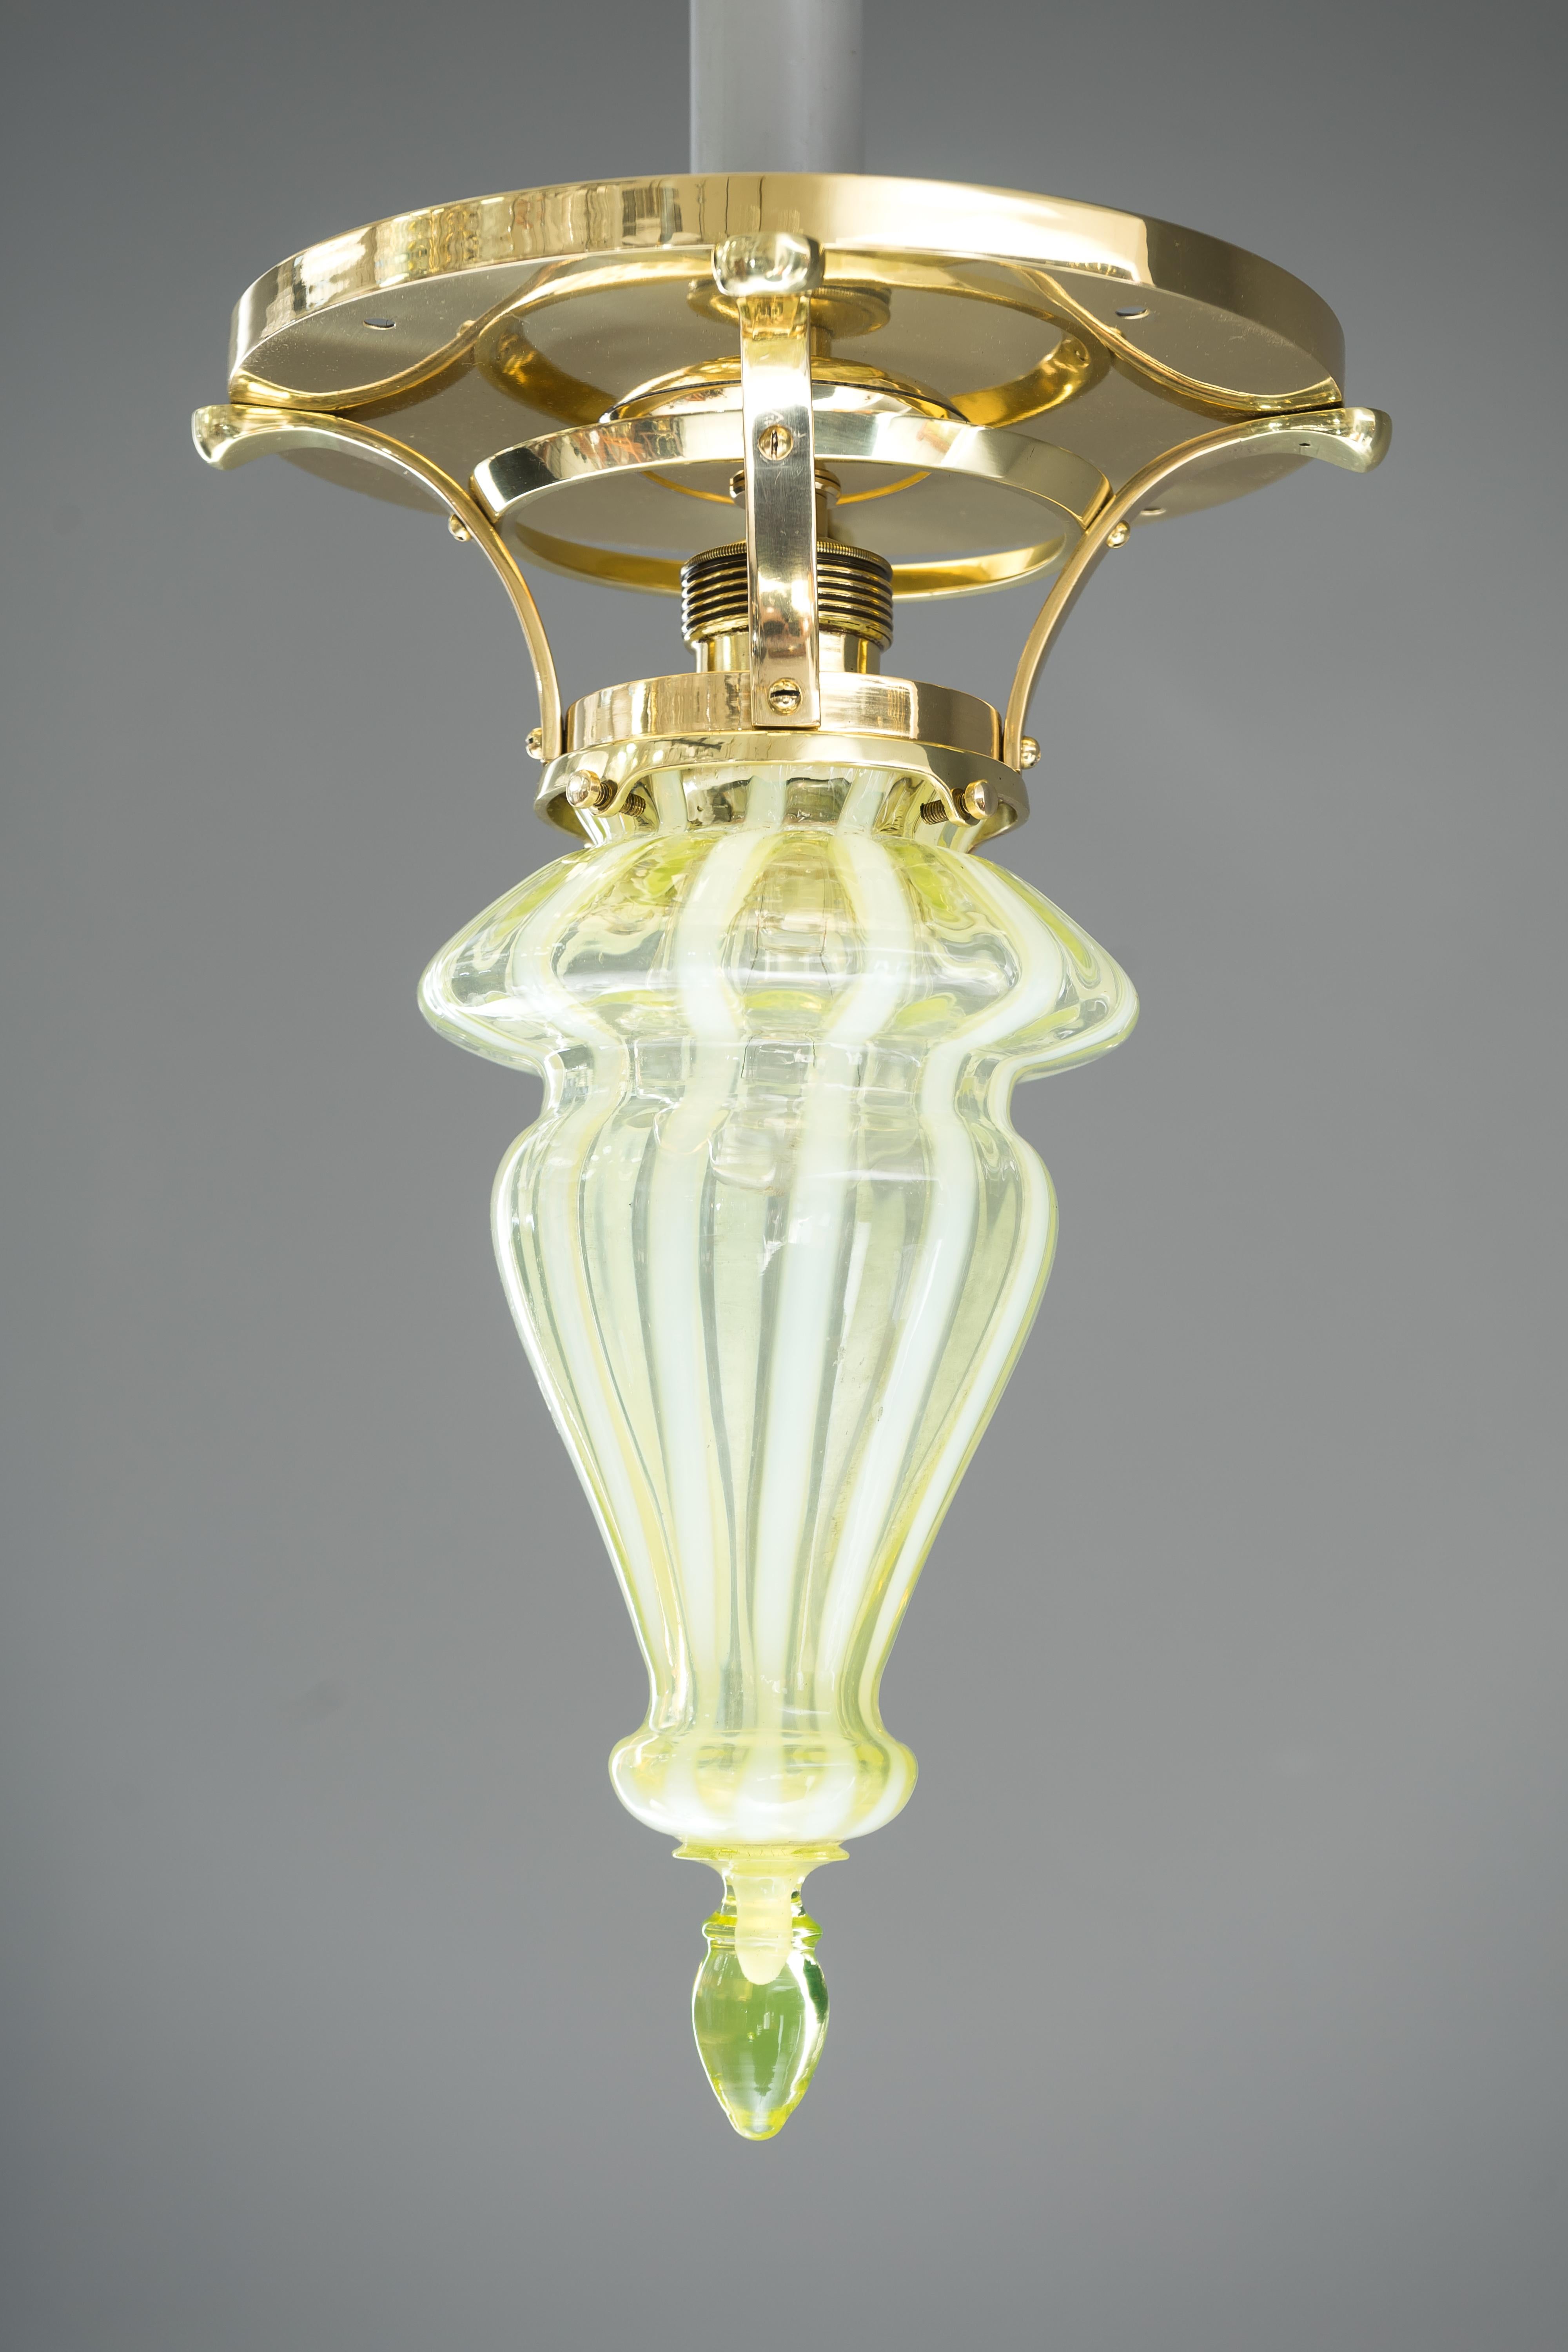 Austrian Art Deco Ceiling Lamp with Opaline Glass Shade, circa 1918 For Sale